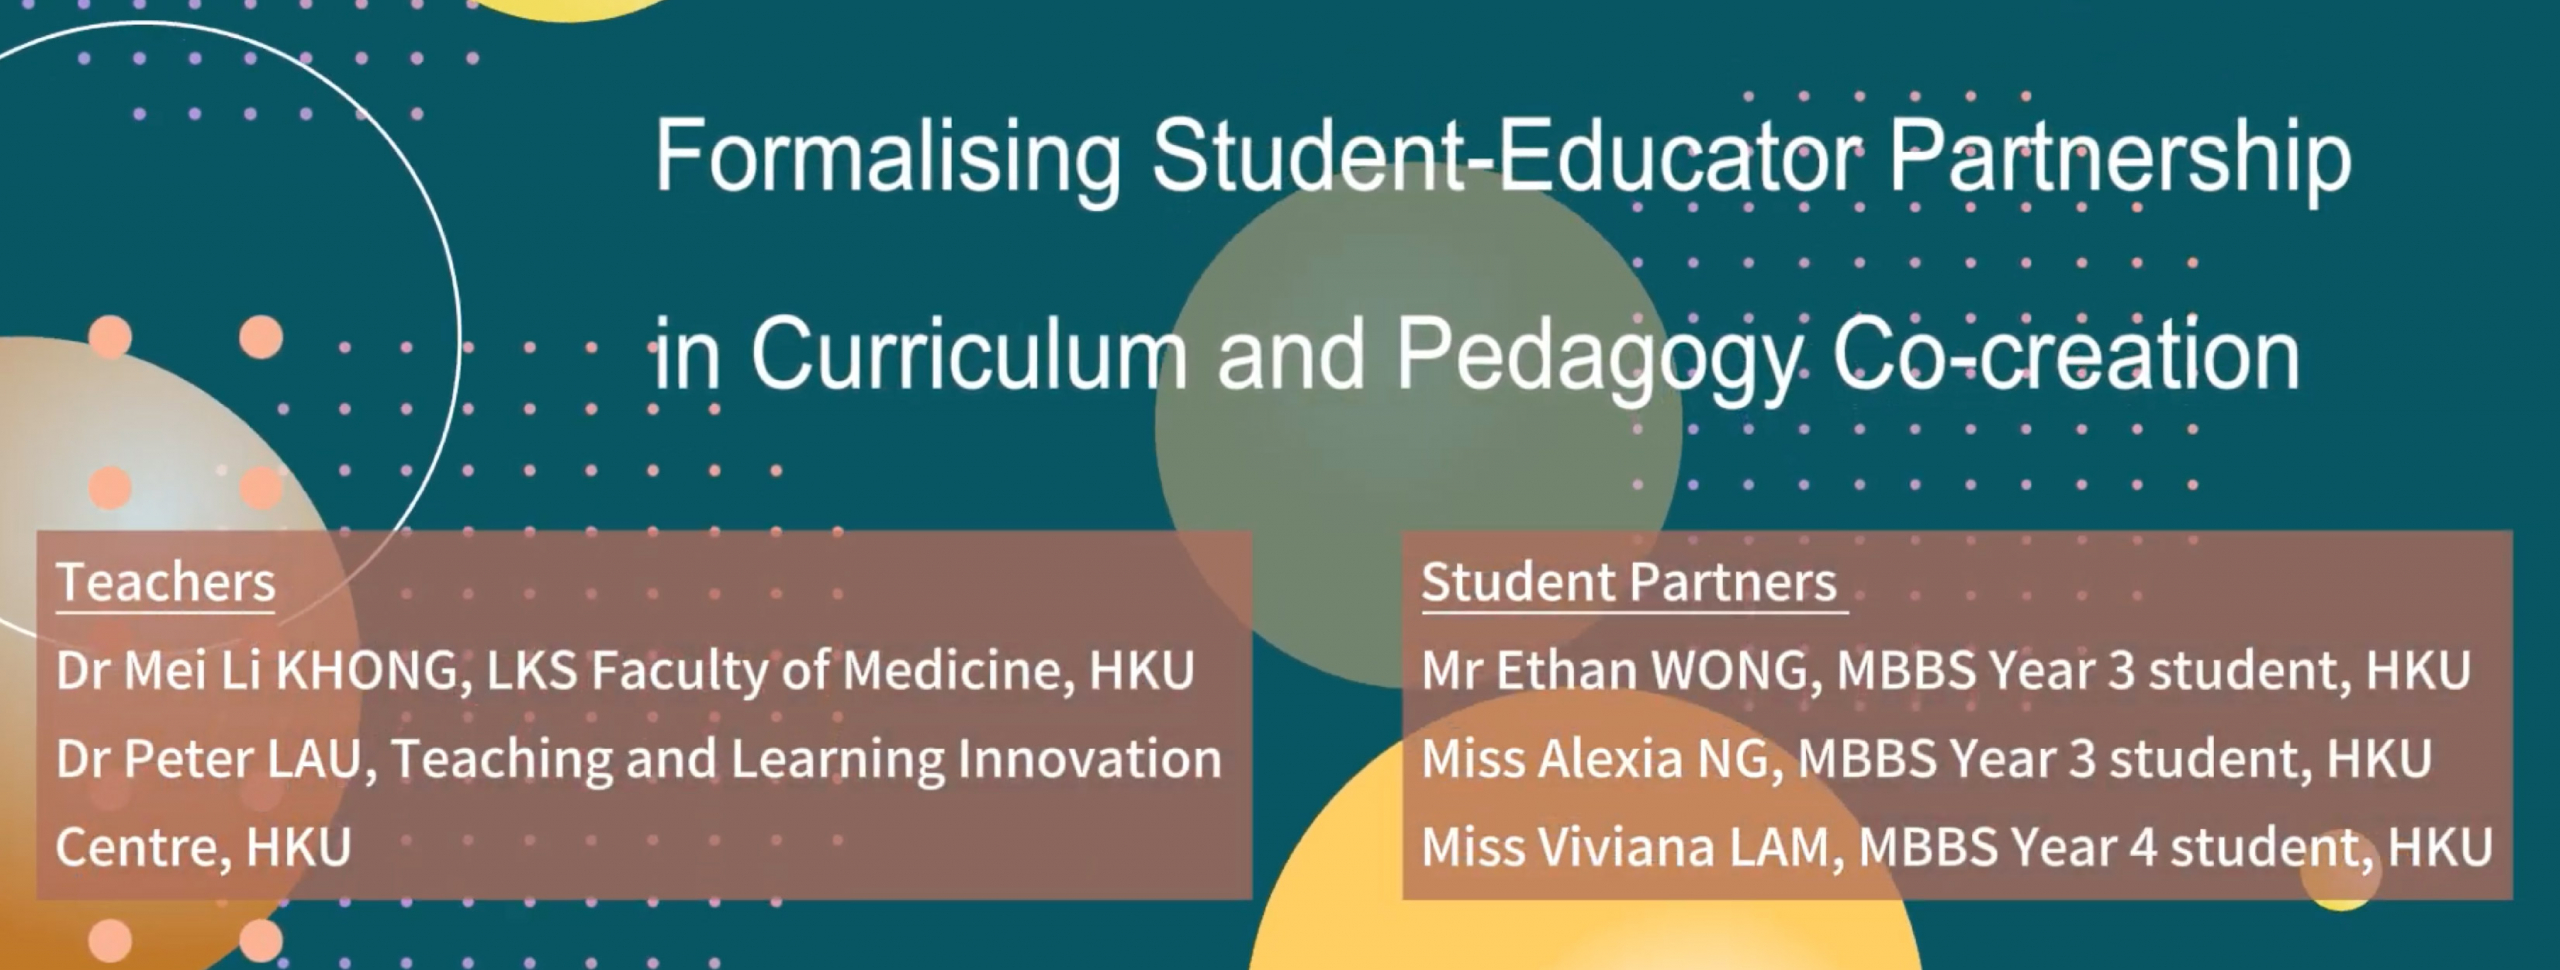 Formalising Student-Educator Partnership in Curriculum and Pedagogy Co-creation